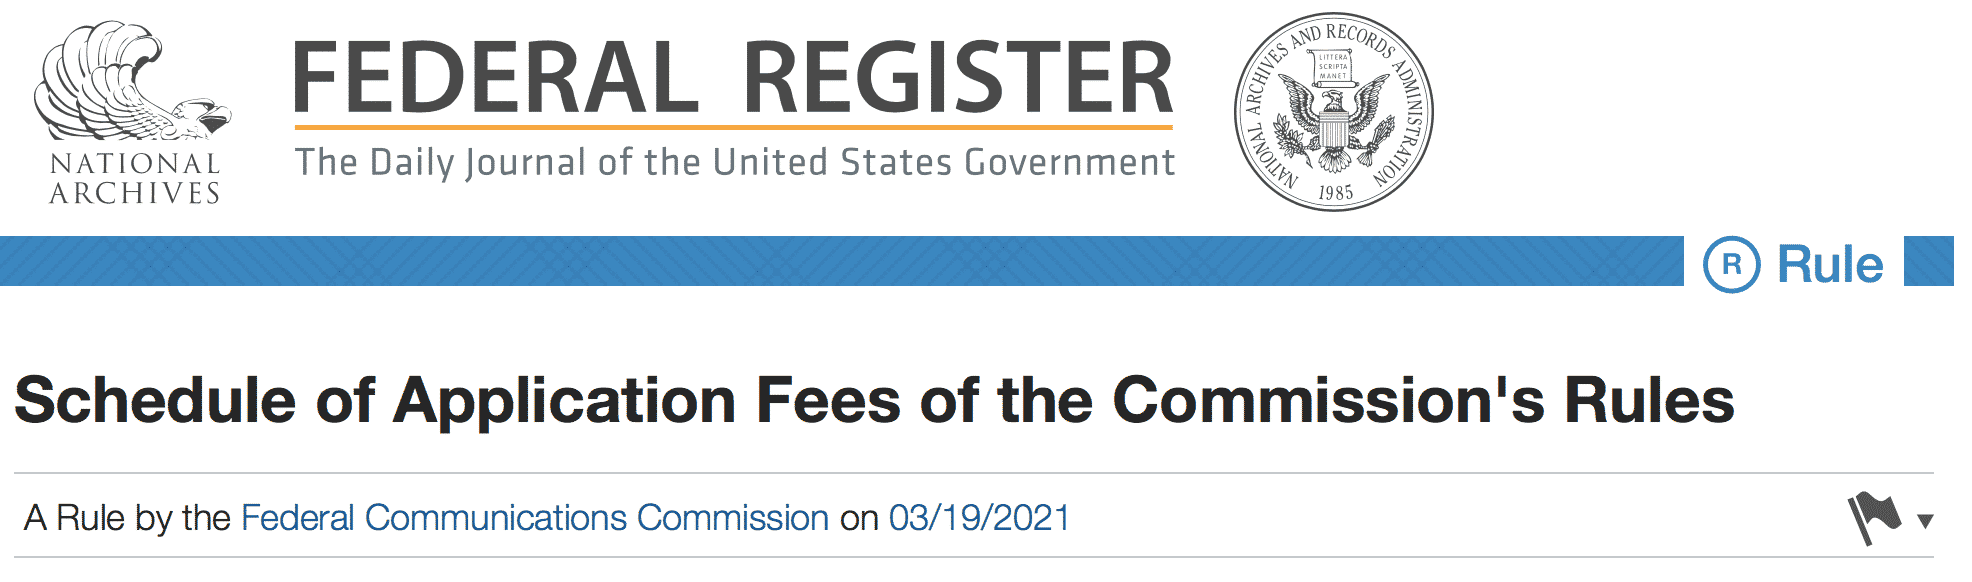 Header Image for FCC Federal Register License Fee Schedule Changes for March 19th 2021 Article